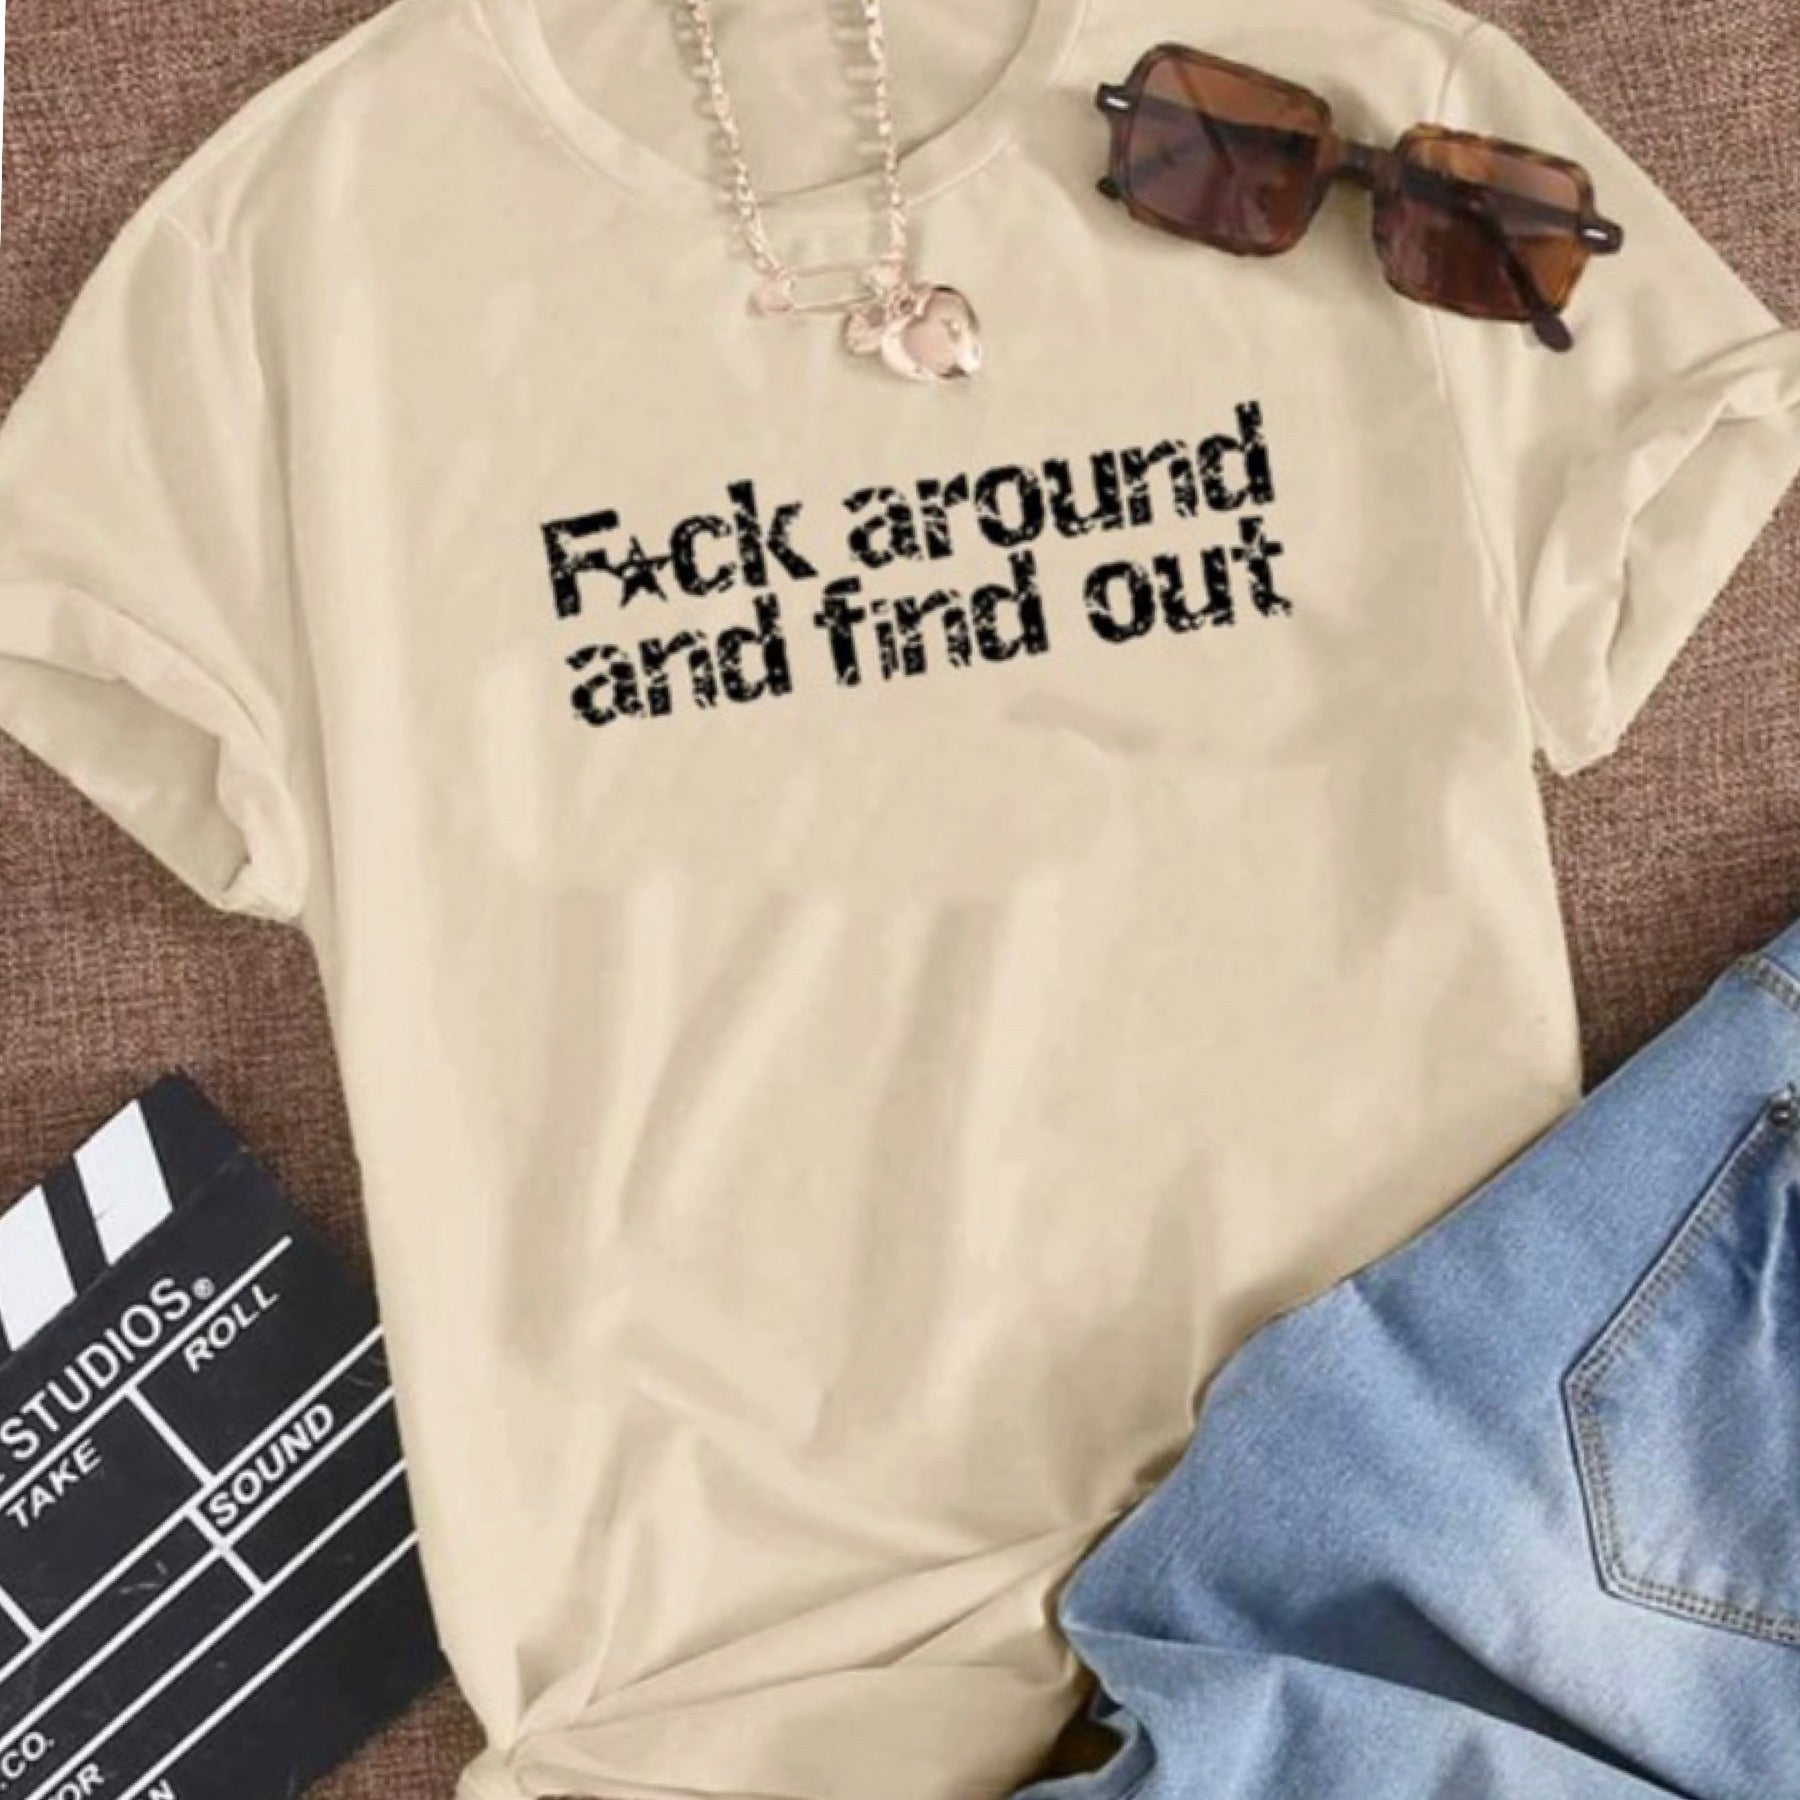 “Find Out” Short Sleeve Crew Neck Tee Shirt